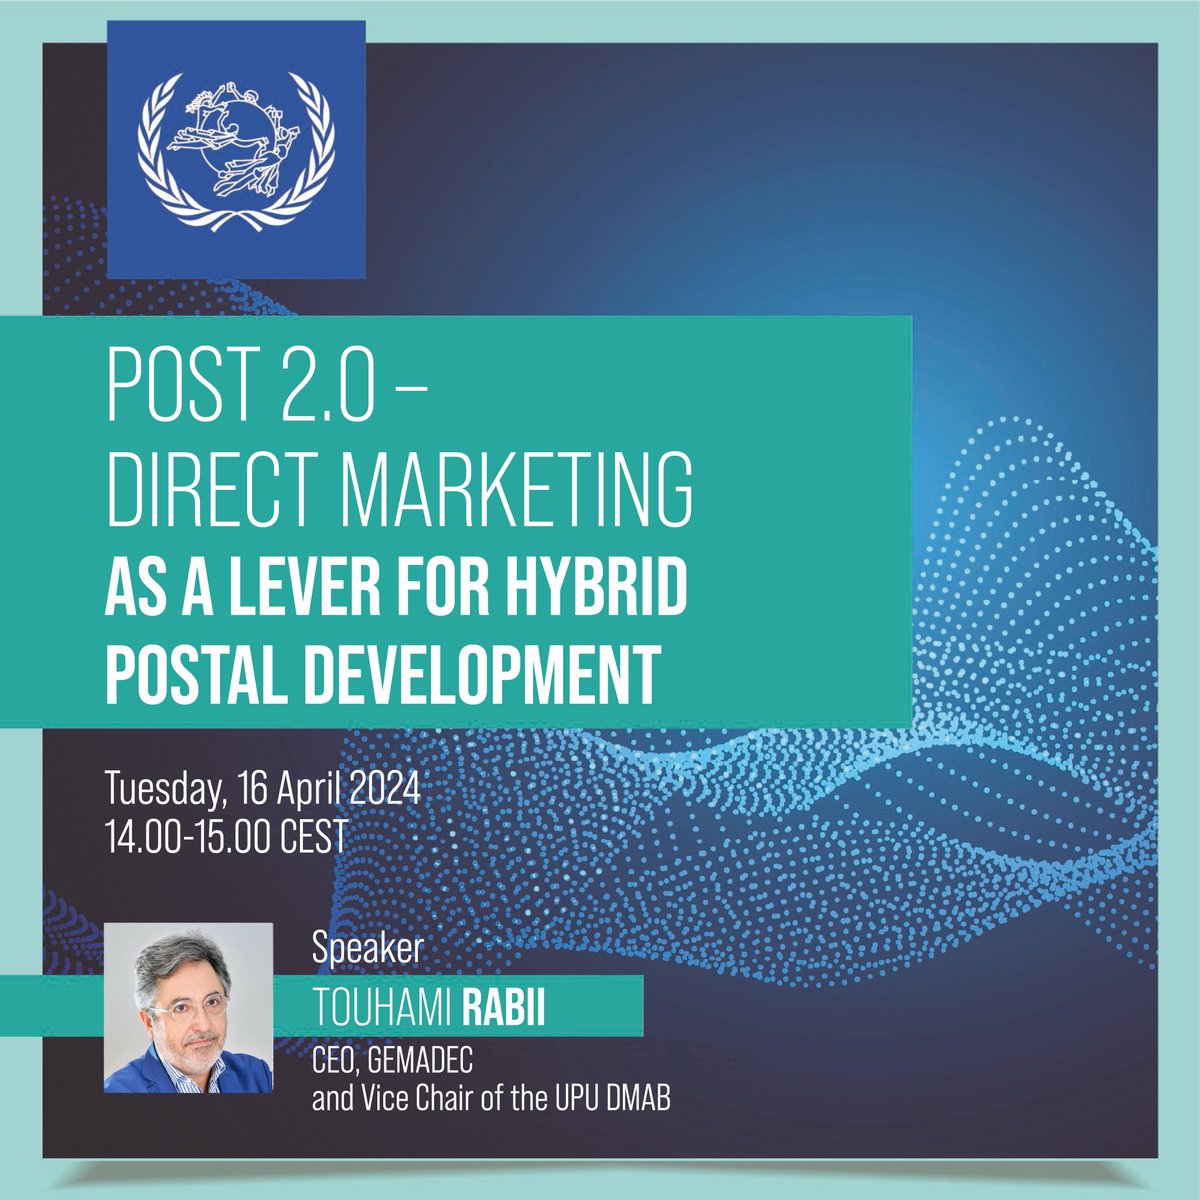 TOMORROW: The UPU Direct Marketing Advisory Board (DMAB) Tech Session will explore how #DirectMarketing can contribute to hybrid #PostalDevelopment.

🗣With Touhami Rabii, CEO of @GEMADEC1 & DMAB Vice-Chair

💻Join us online from 2 p.m. CEST
🌐Learn more👉bit.ly/3VLFg2I